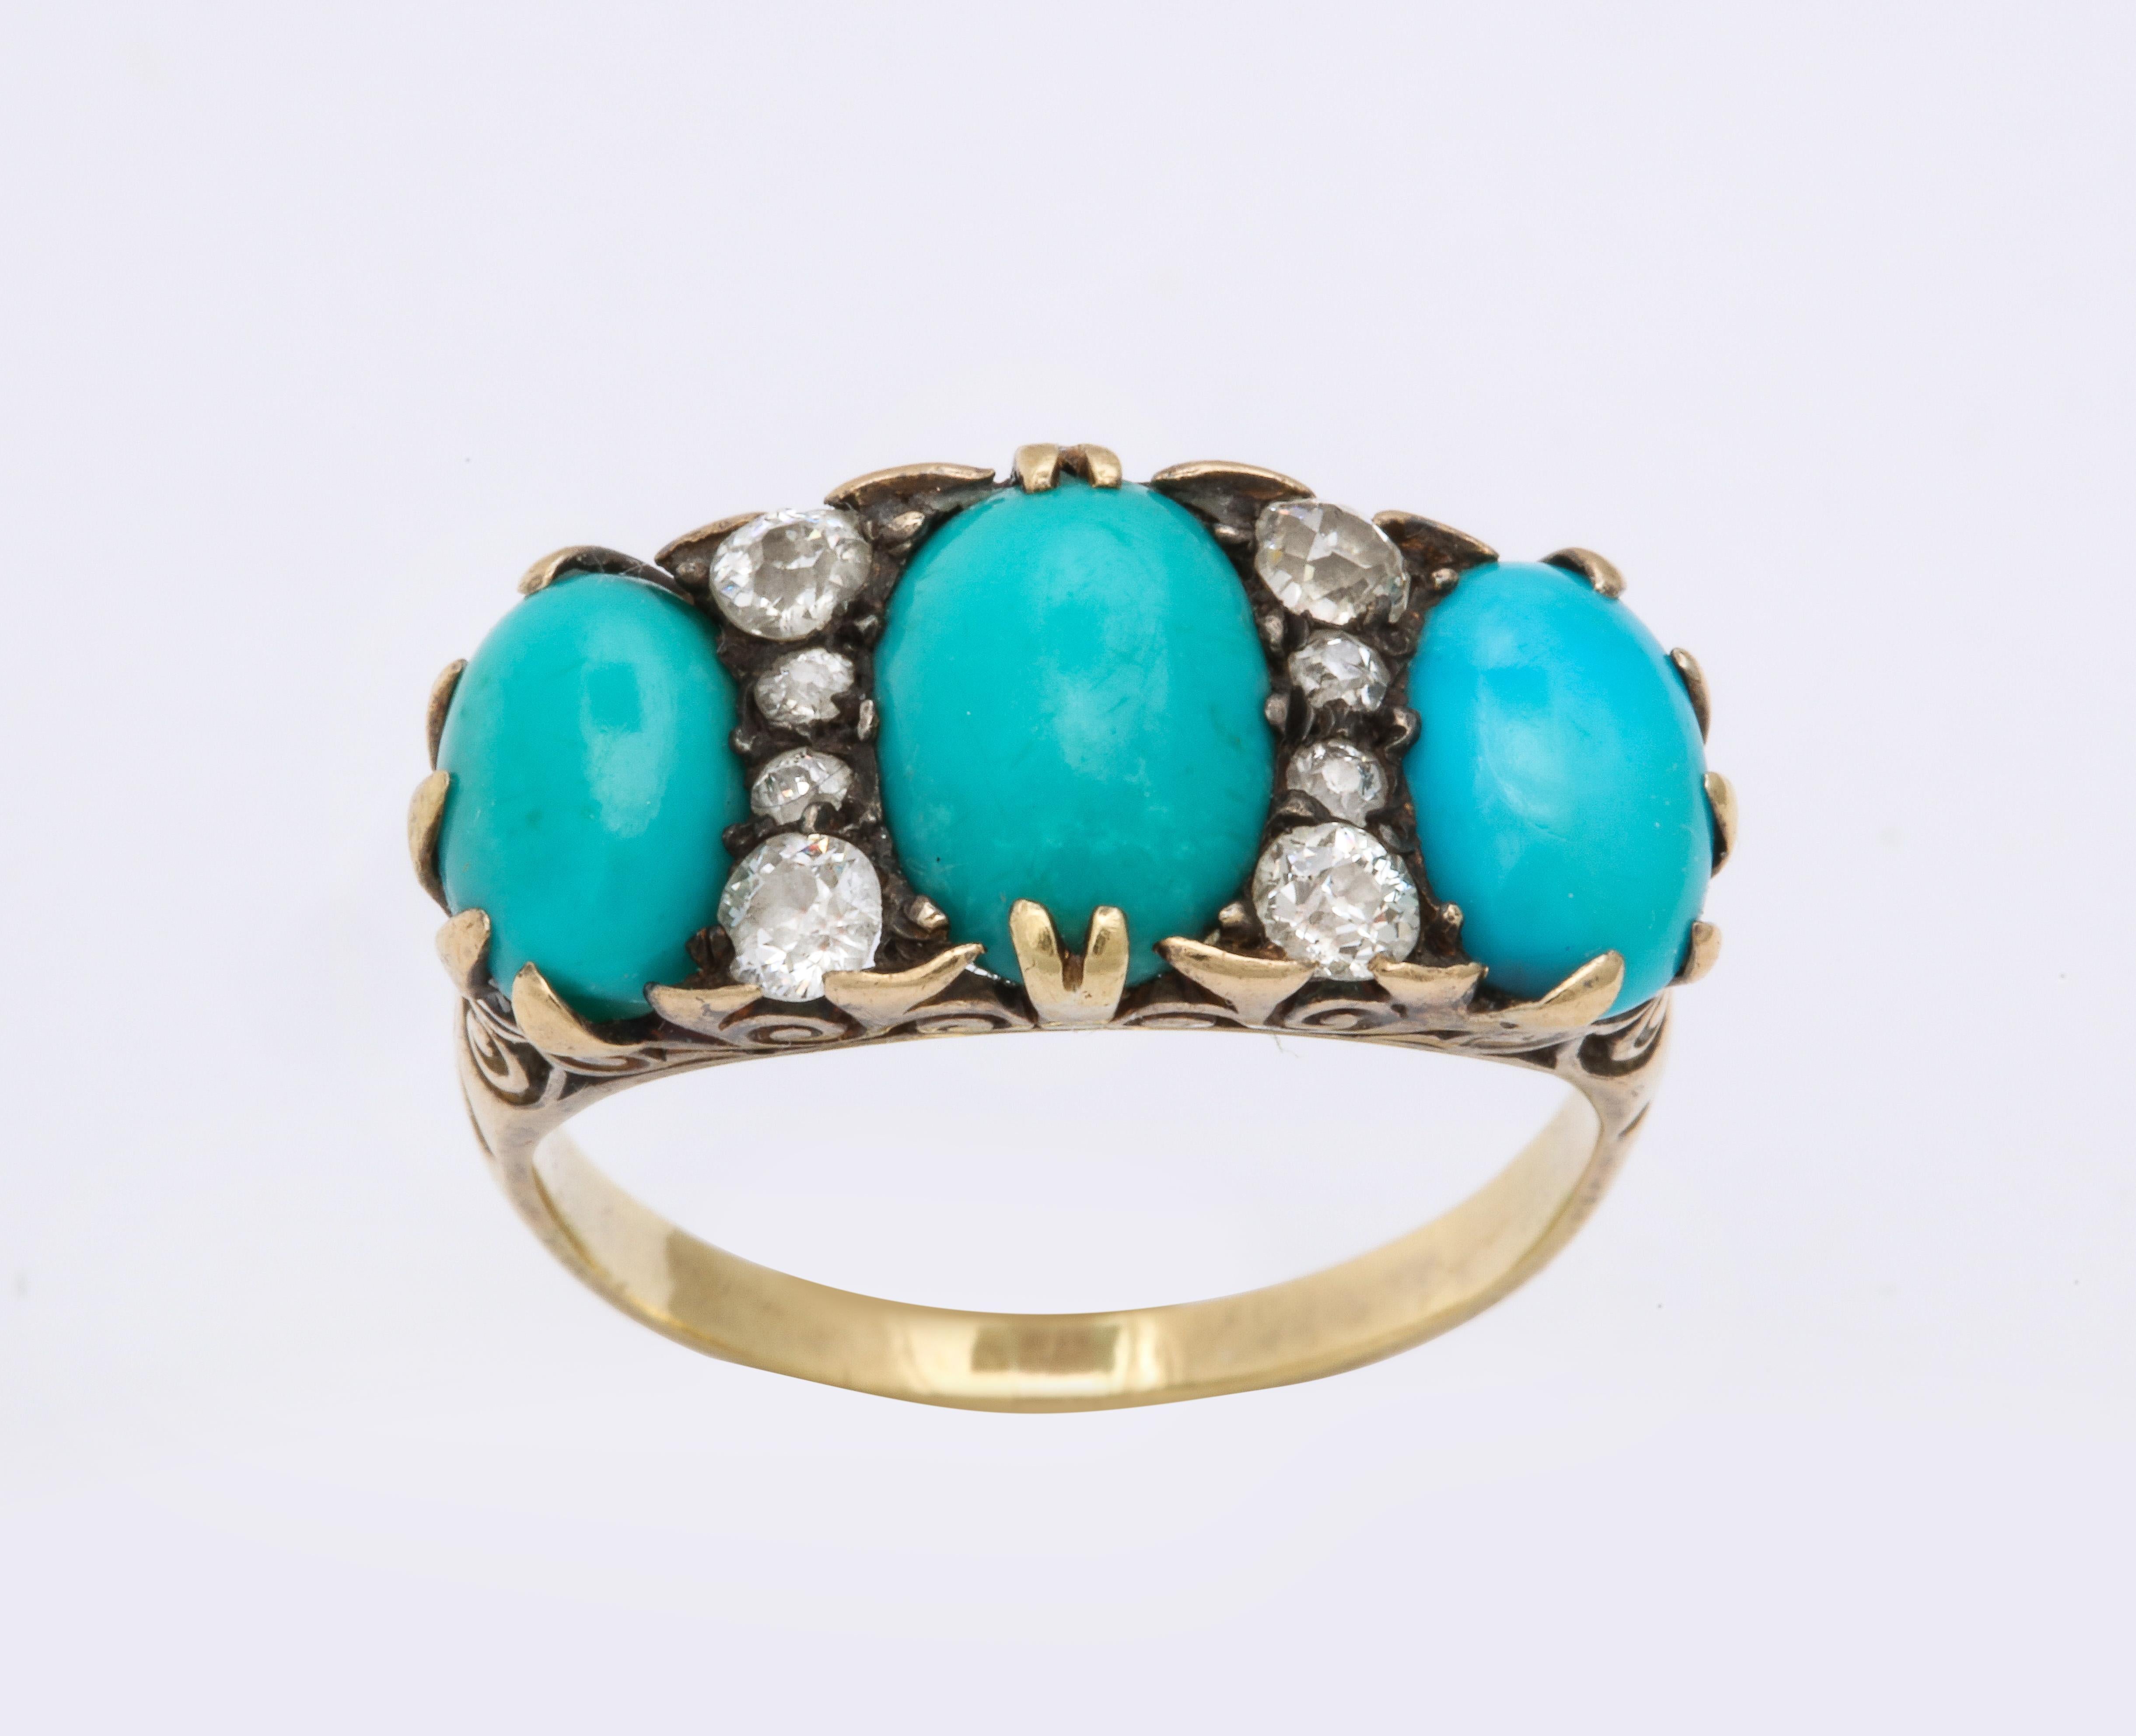 Three sky blue, oval turquoise gems are separated by eight diamonds set in a stunning 18 Kt ring made c.1860 in one original piece, The shoulders are tulips with strong triangular prongs holding stones of approximately 13mm and 10mm. Added for